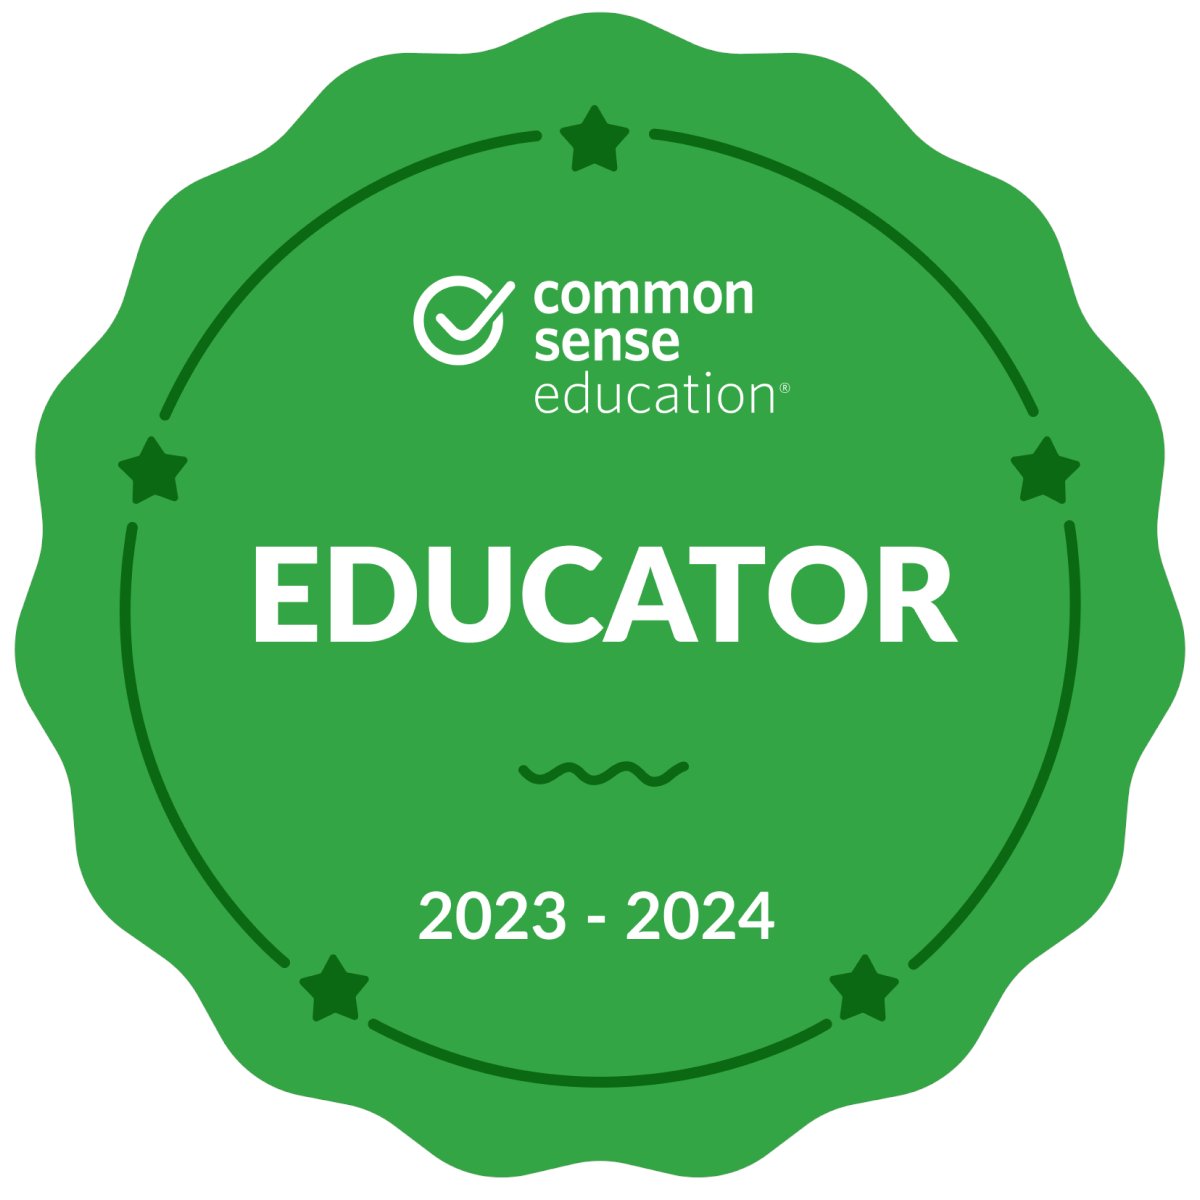 School Library Month is the perfect time to share that @FMS_BCPS has been recertified as a @CommonSenseEd school. At the end of Q3 our #fmsreaders had already met and exceeded our circulation goal for the year. #FranklinForward @SchifferB @BCPSLMP #AASLslm